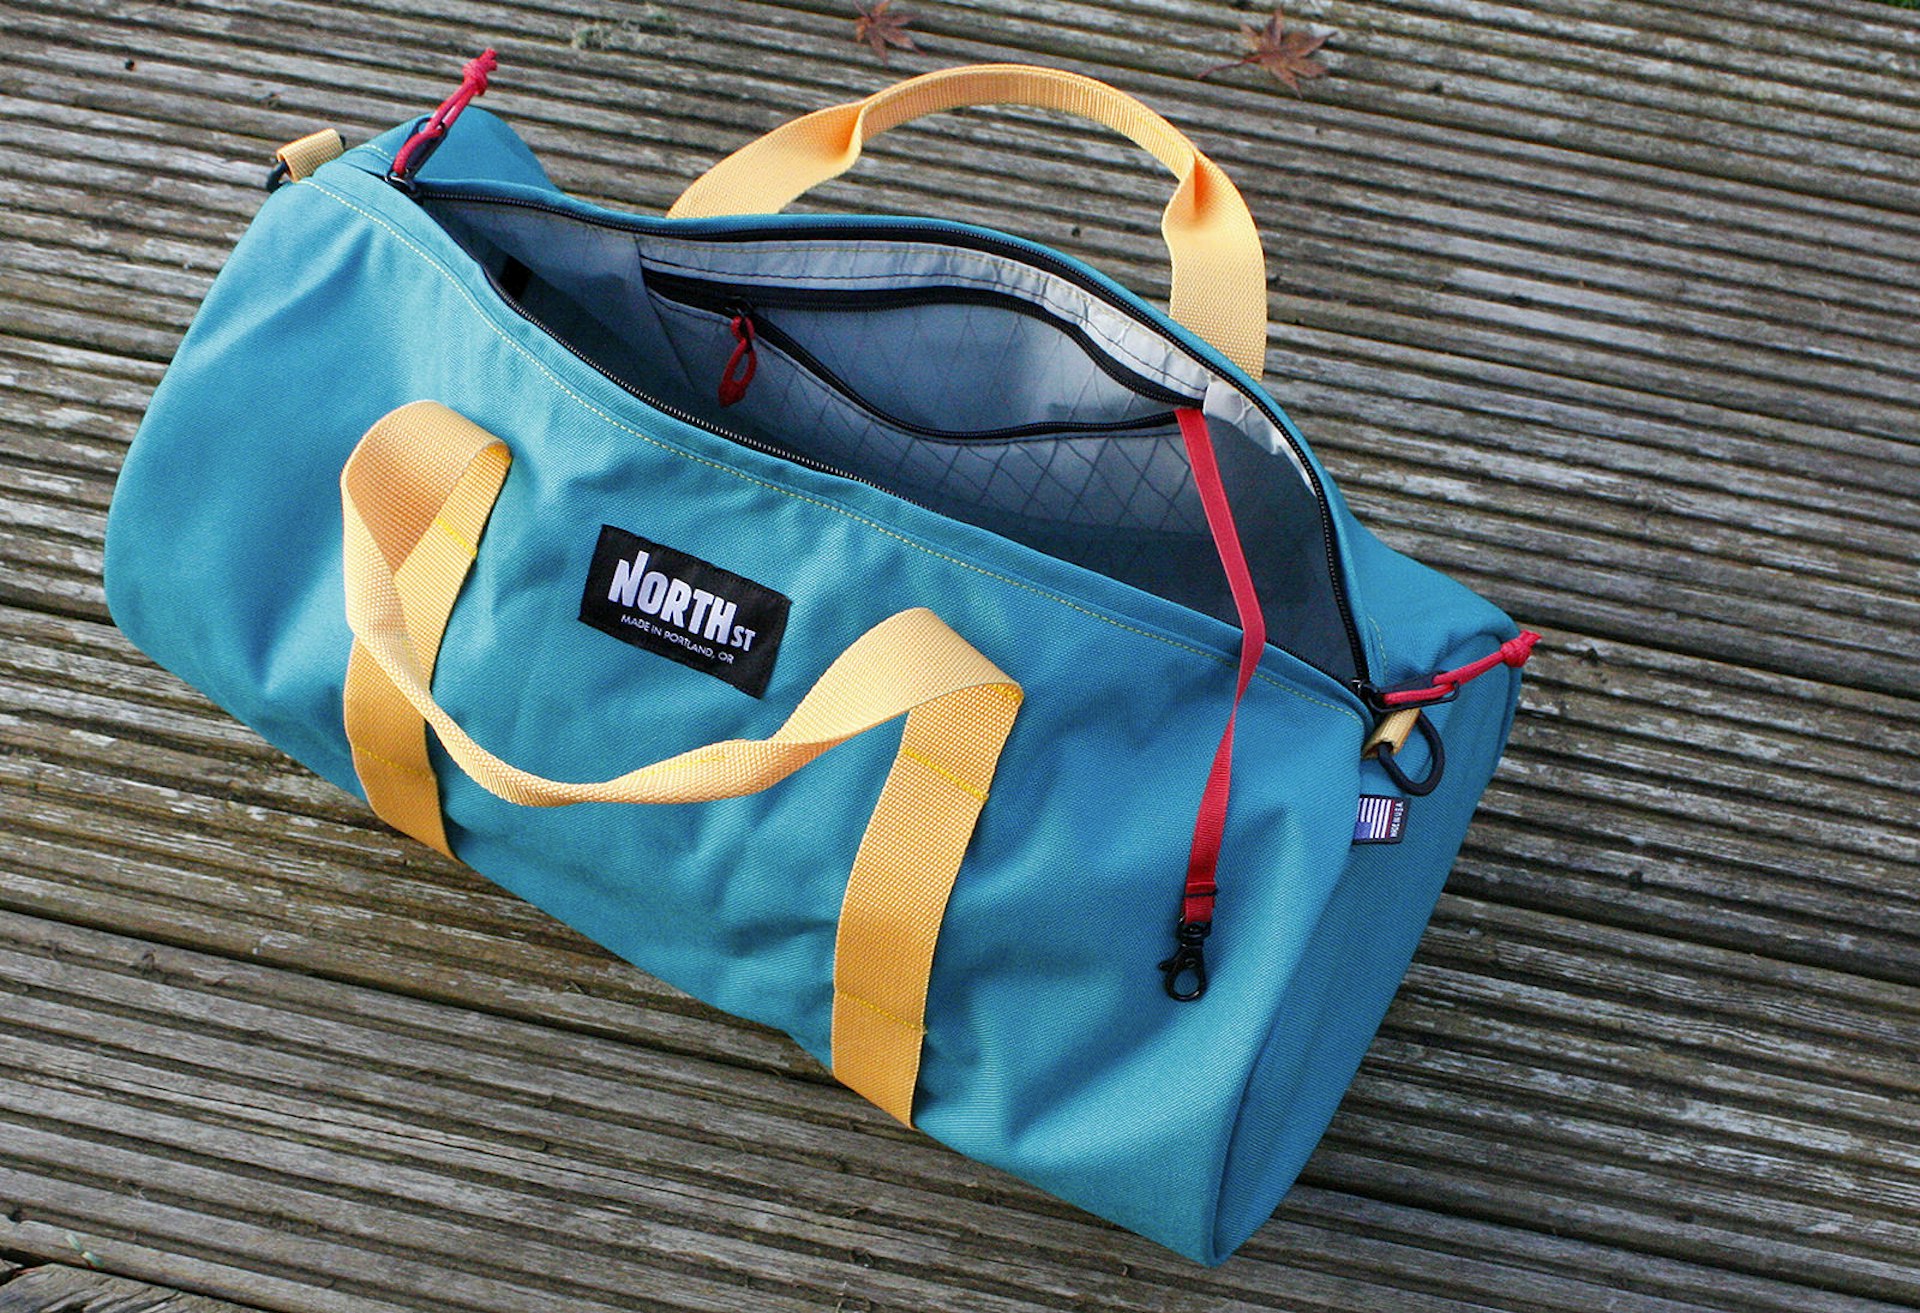 North Street Scout 21 duffle bag: for students of the ‘throw it in’ school of packing © David Else / Lonely Planet